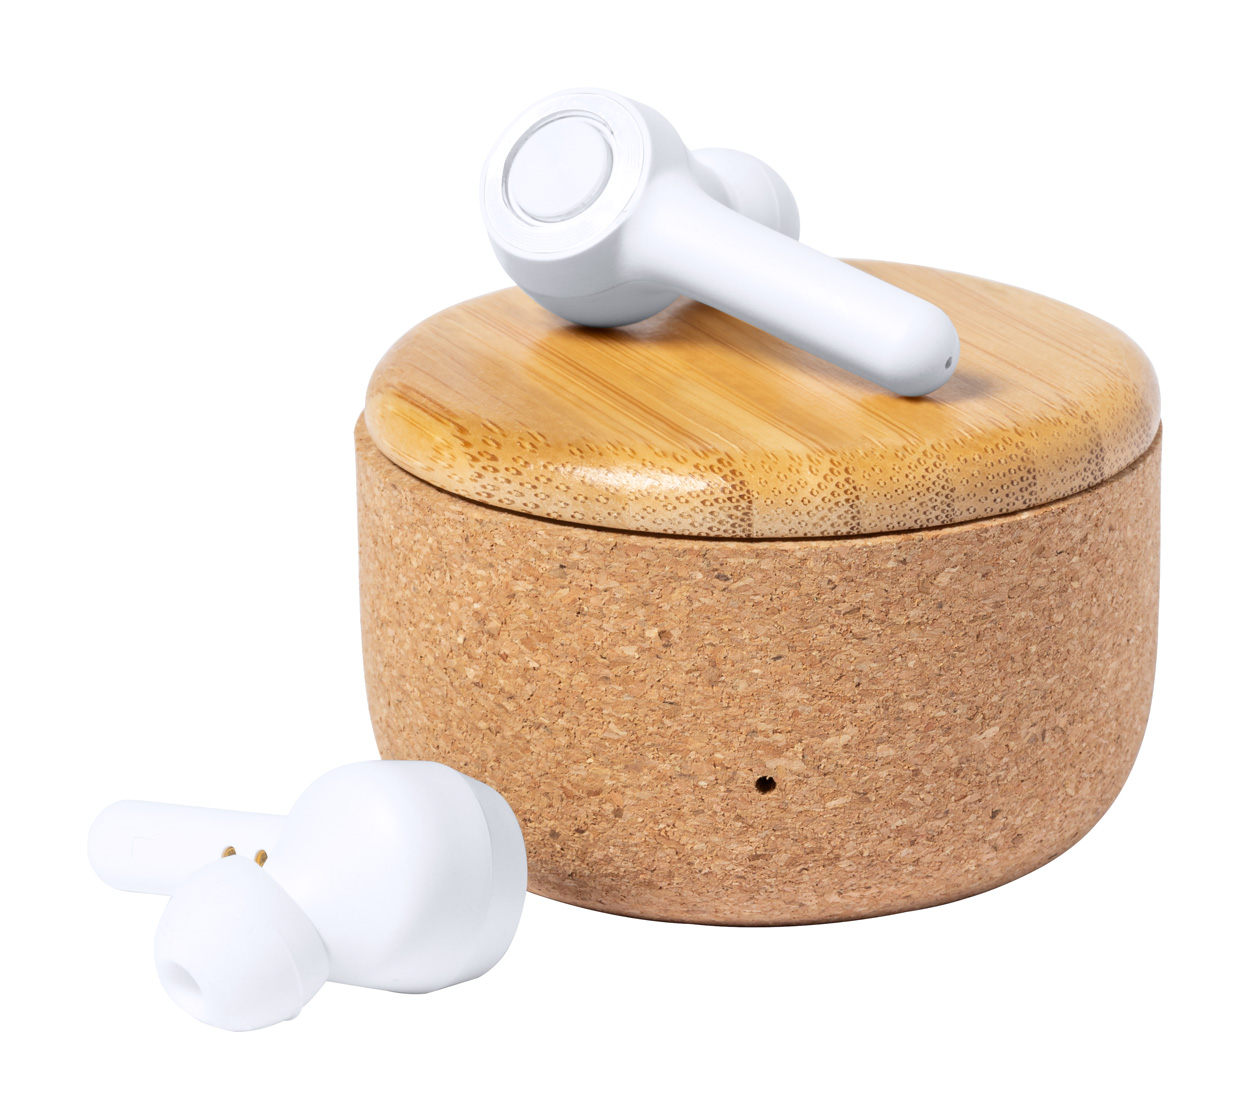 Wireless headphones GRIGAL in cork and bamboo box - natural